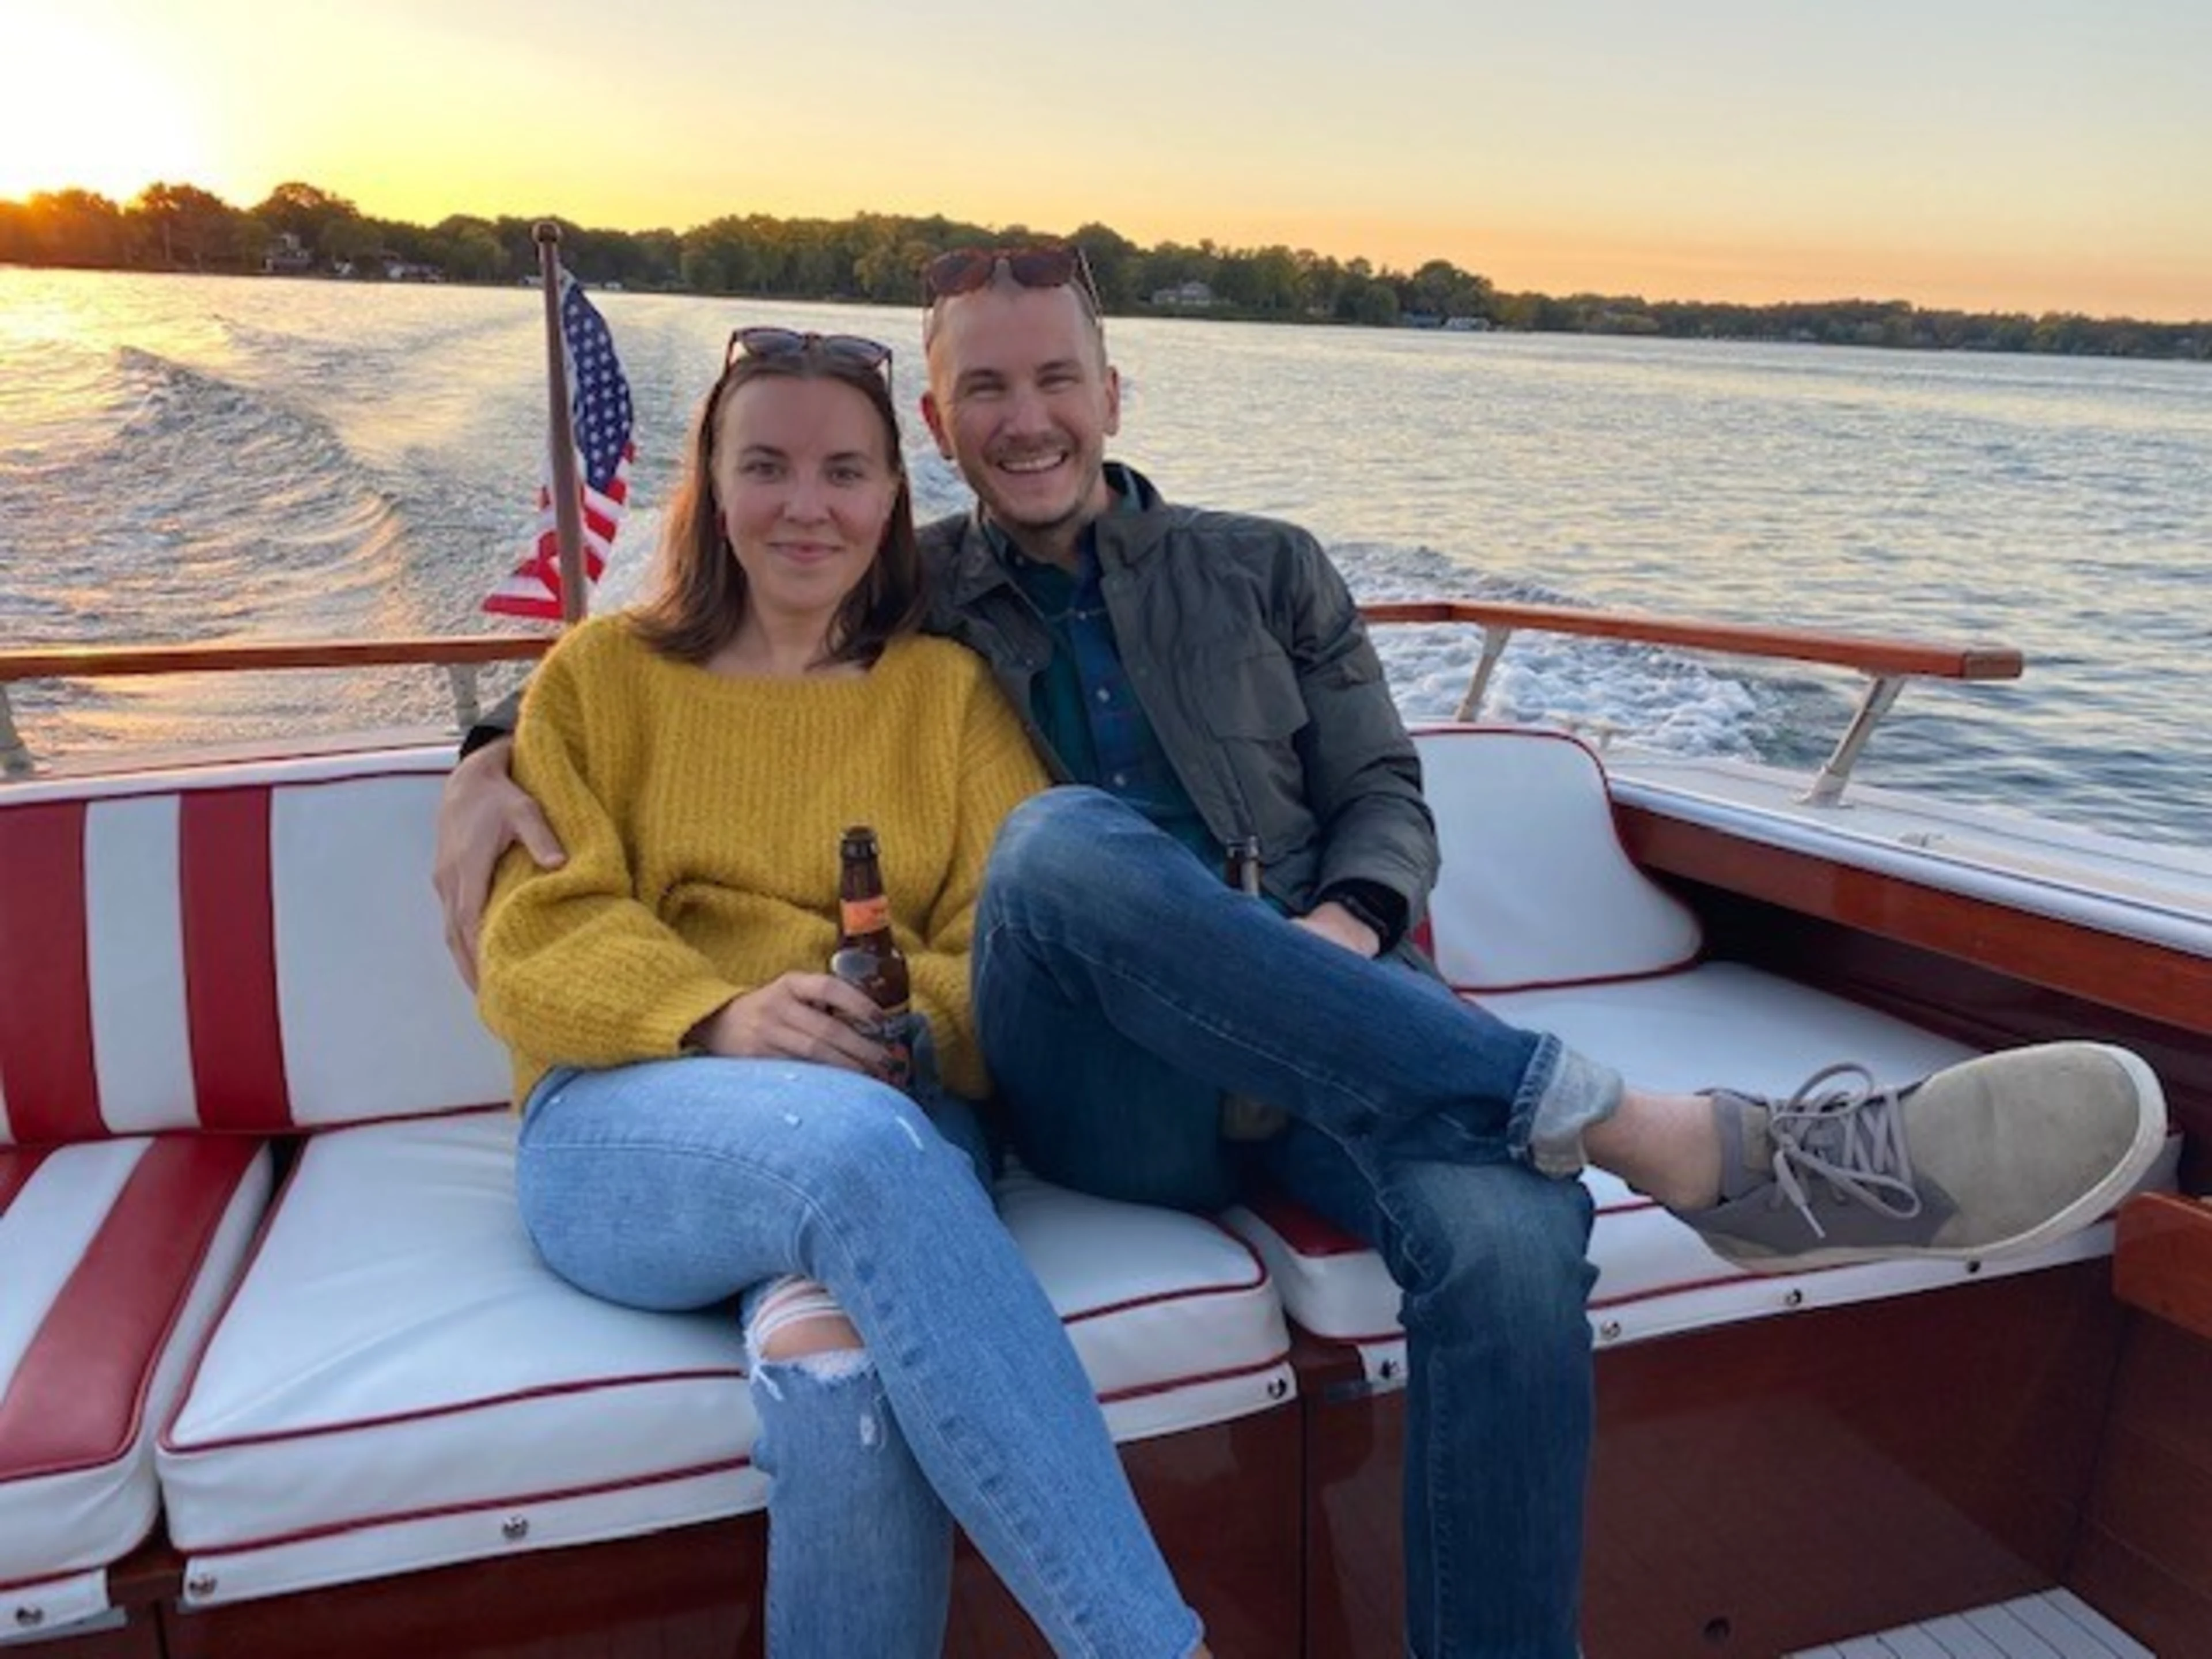 Matt and I enjoying a sunset on one of the many lakes in Minnesota (where I grew up!)